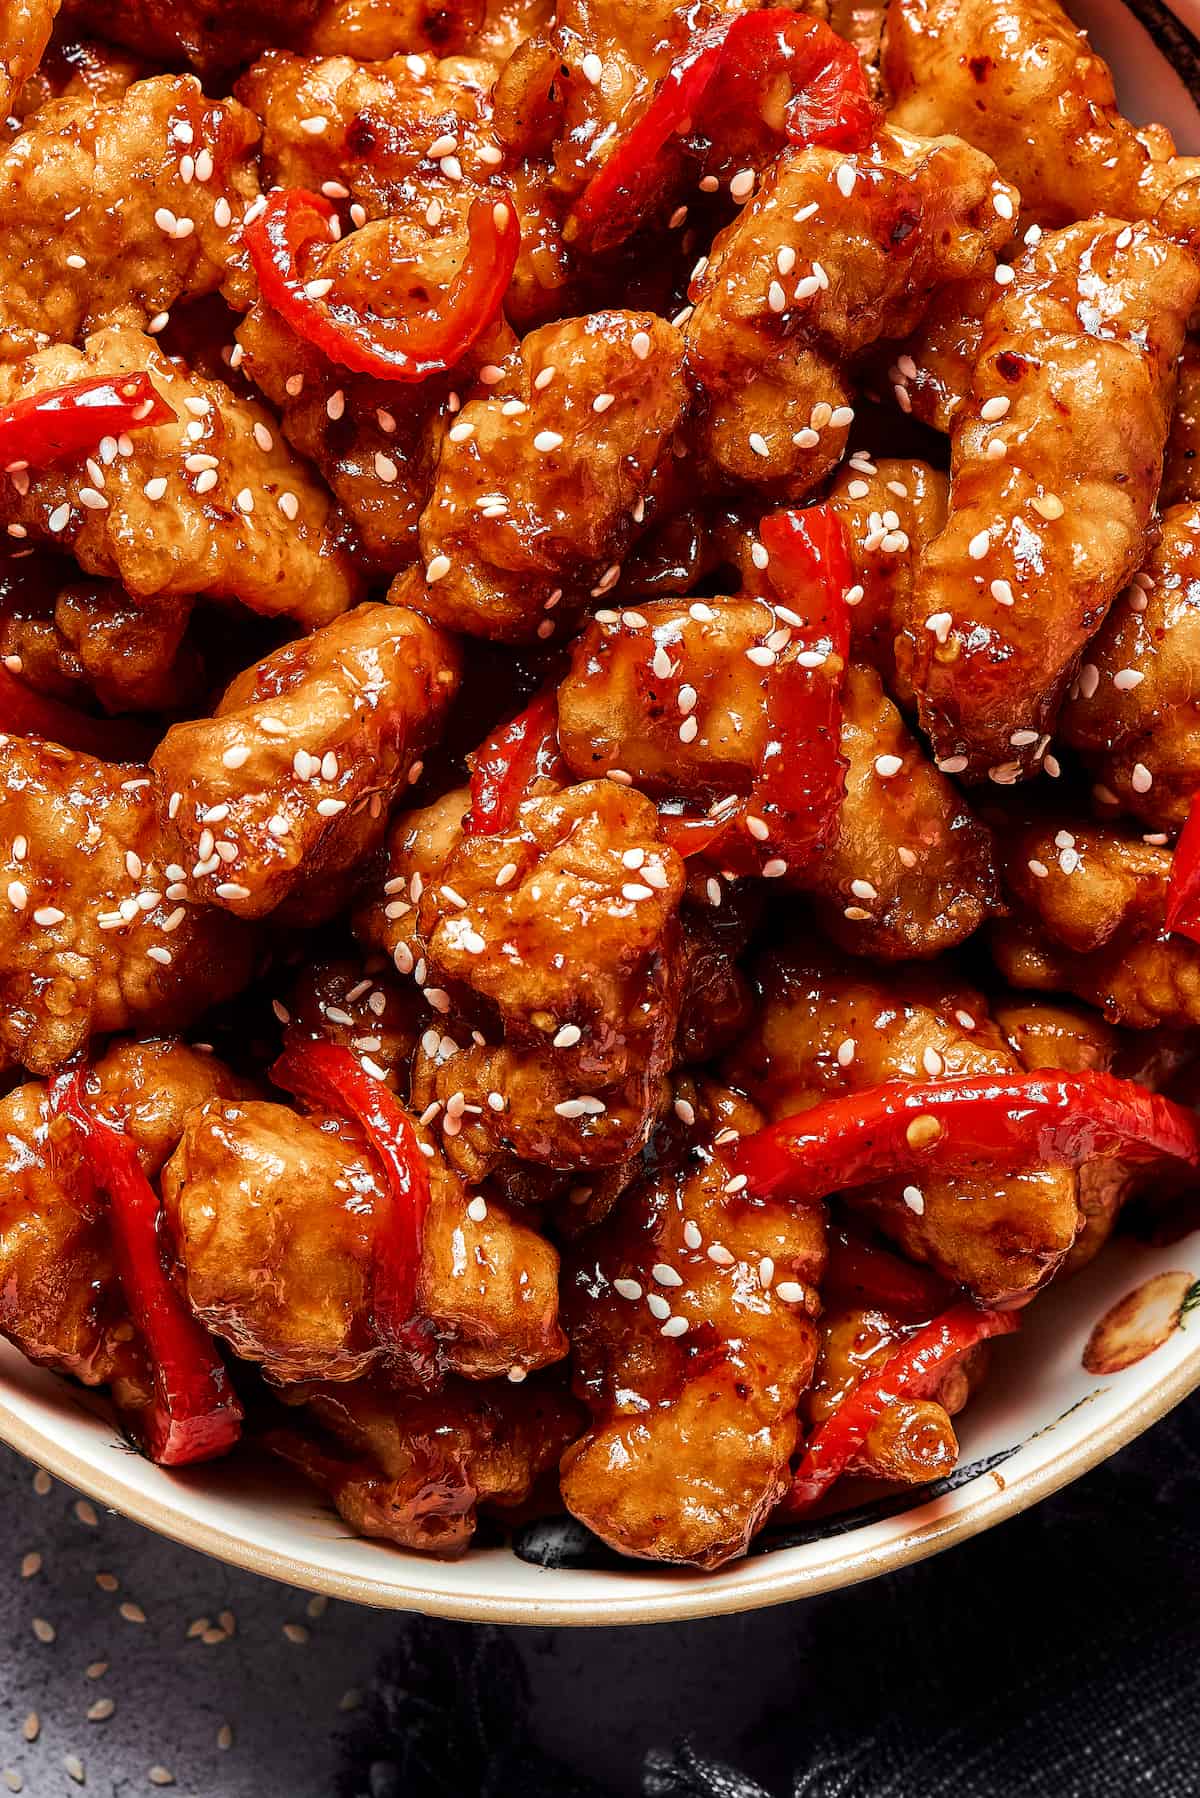 Overhead shot of saucy chicken pieces, garnished with sesame seeds.